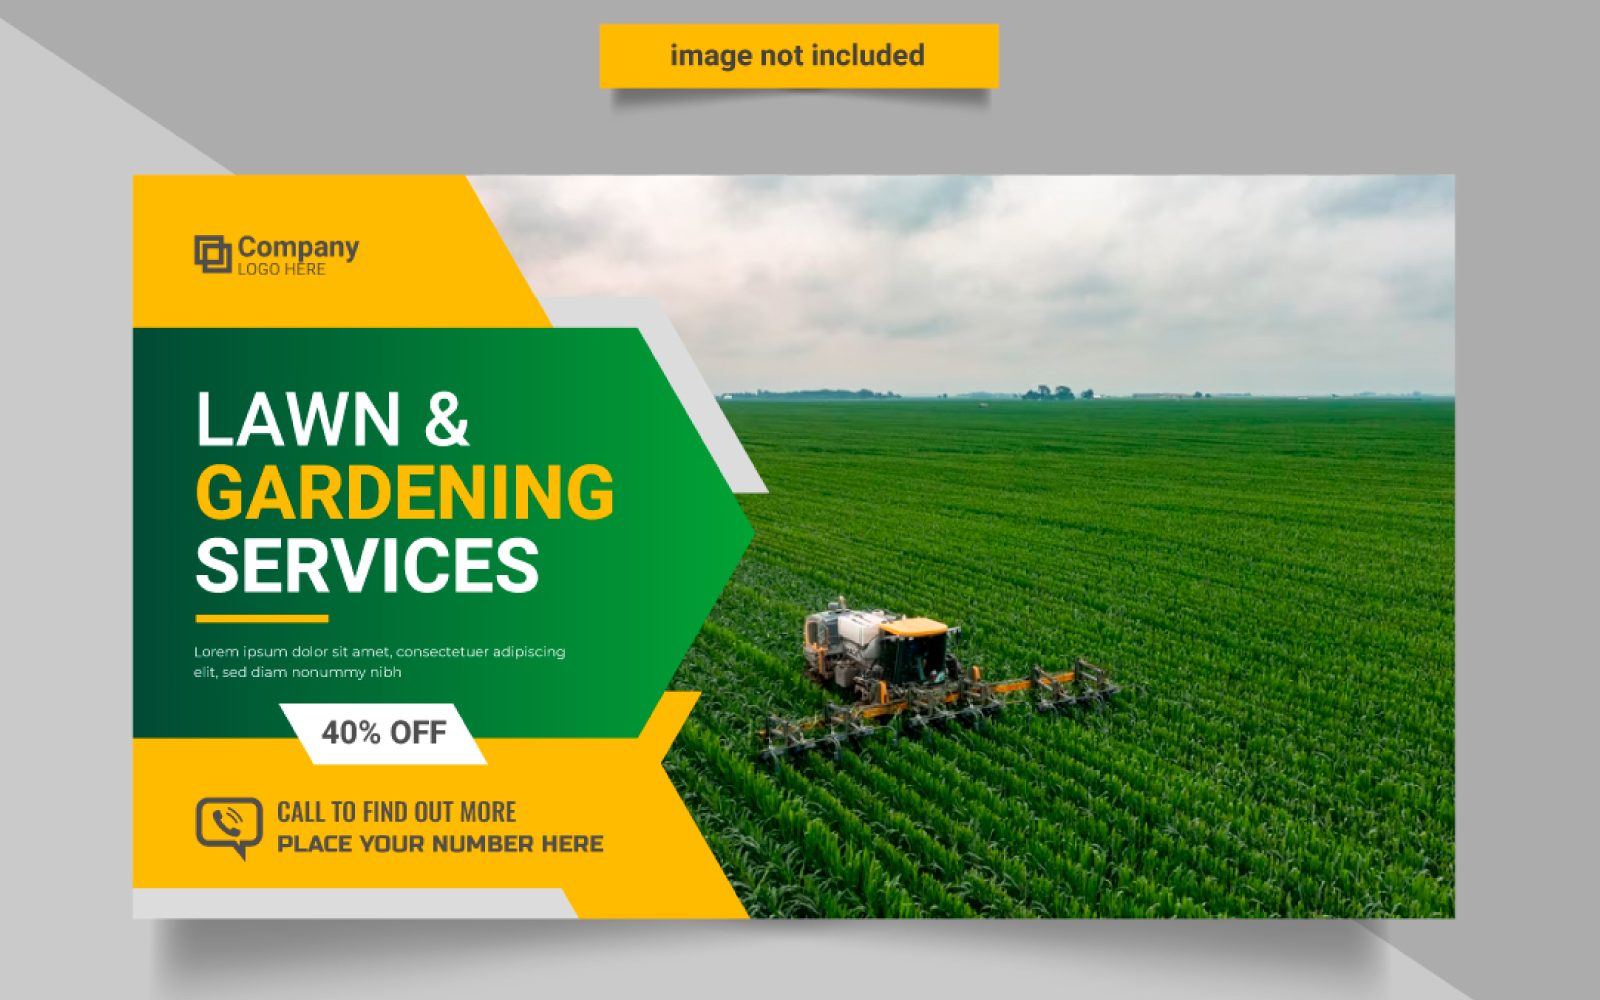 Agro farm and landscaping business web banner design  farm management service